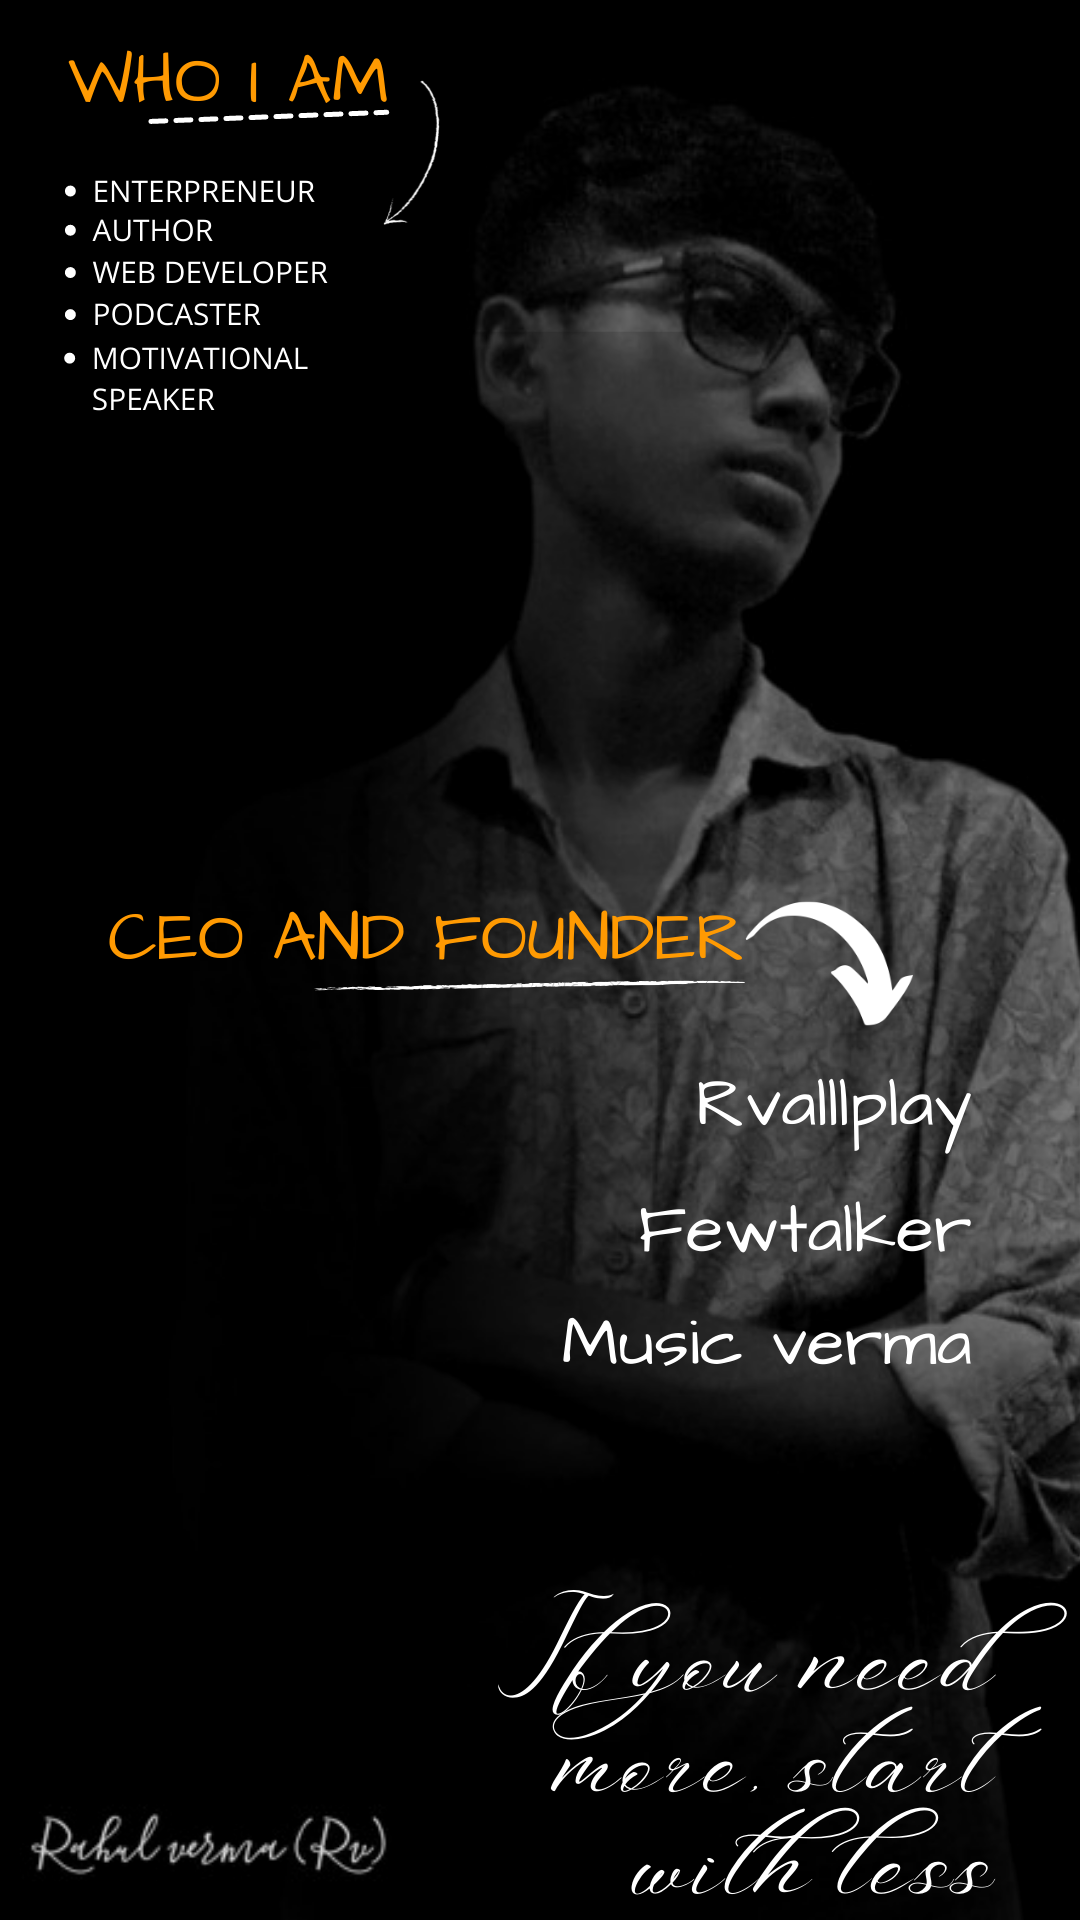 Rahul verma (Rv) CEO and founder of Rvalllplay | Indian Enterpreneur, Author and Motivational Speaker